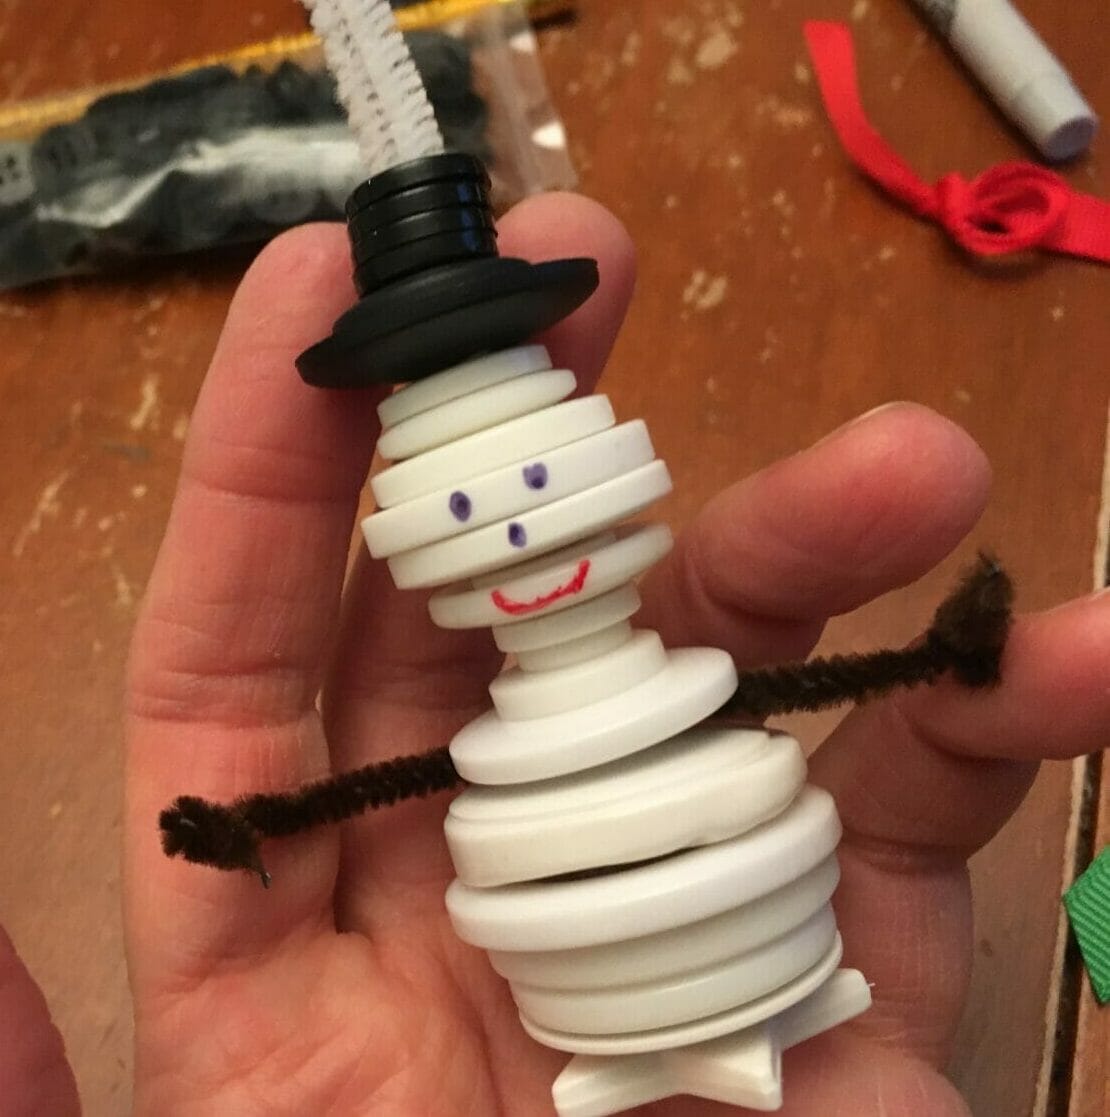 These cute button snowman ornaments make great DIY Christmas gifts while helping little hands practice sorting and fine motor skills.